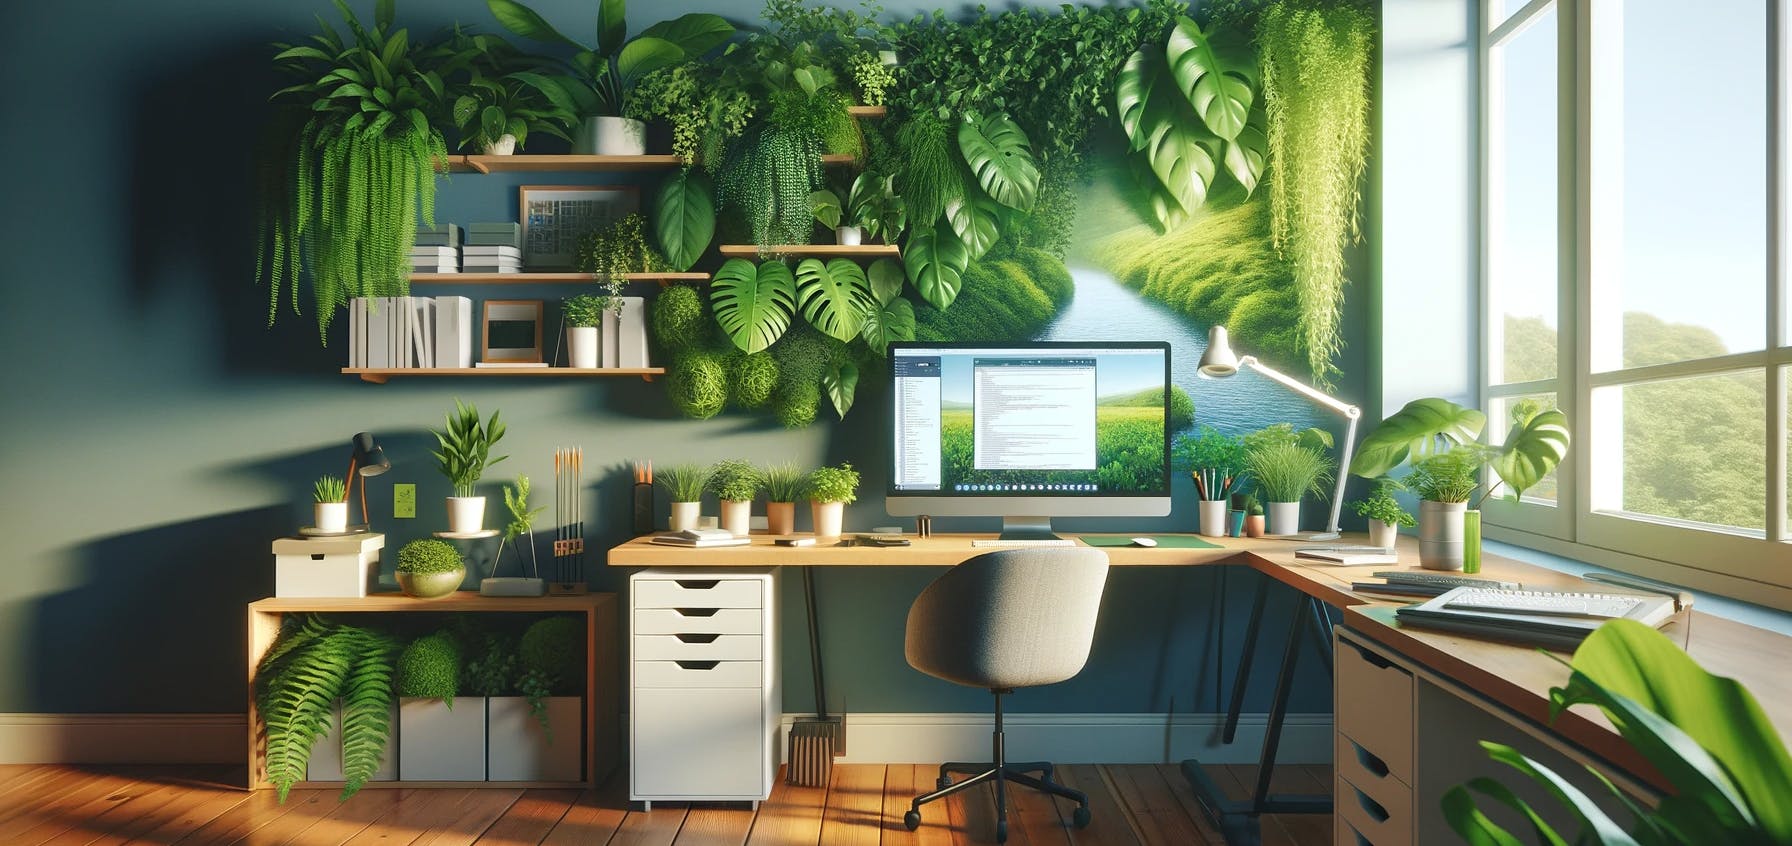 An Empty desk surrounded by lush green plants